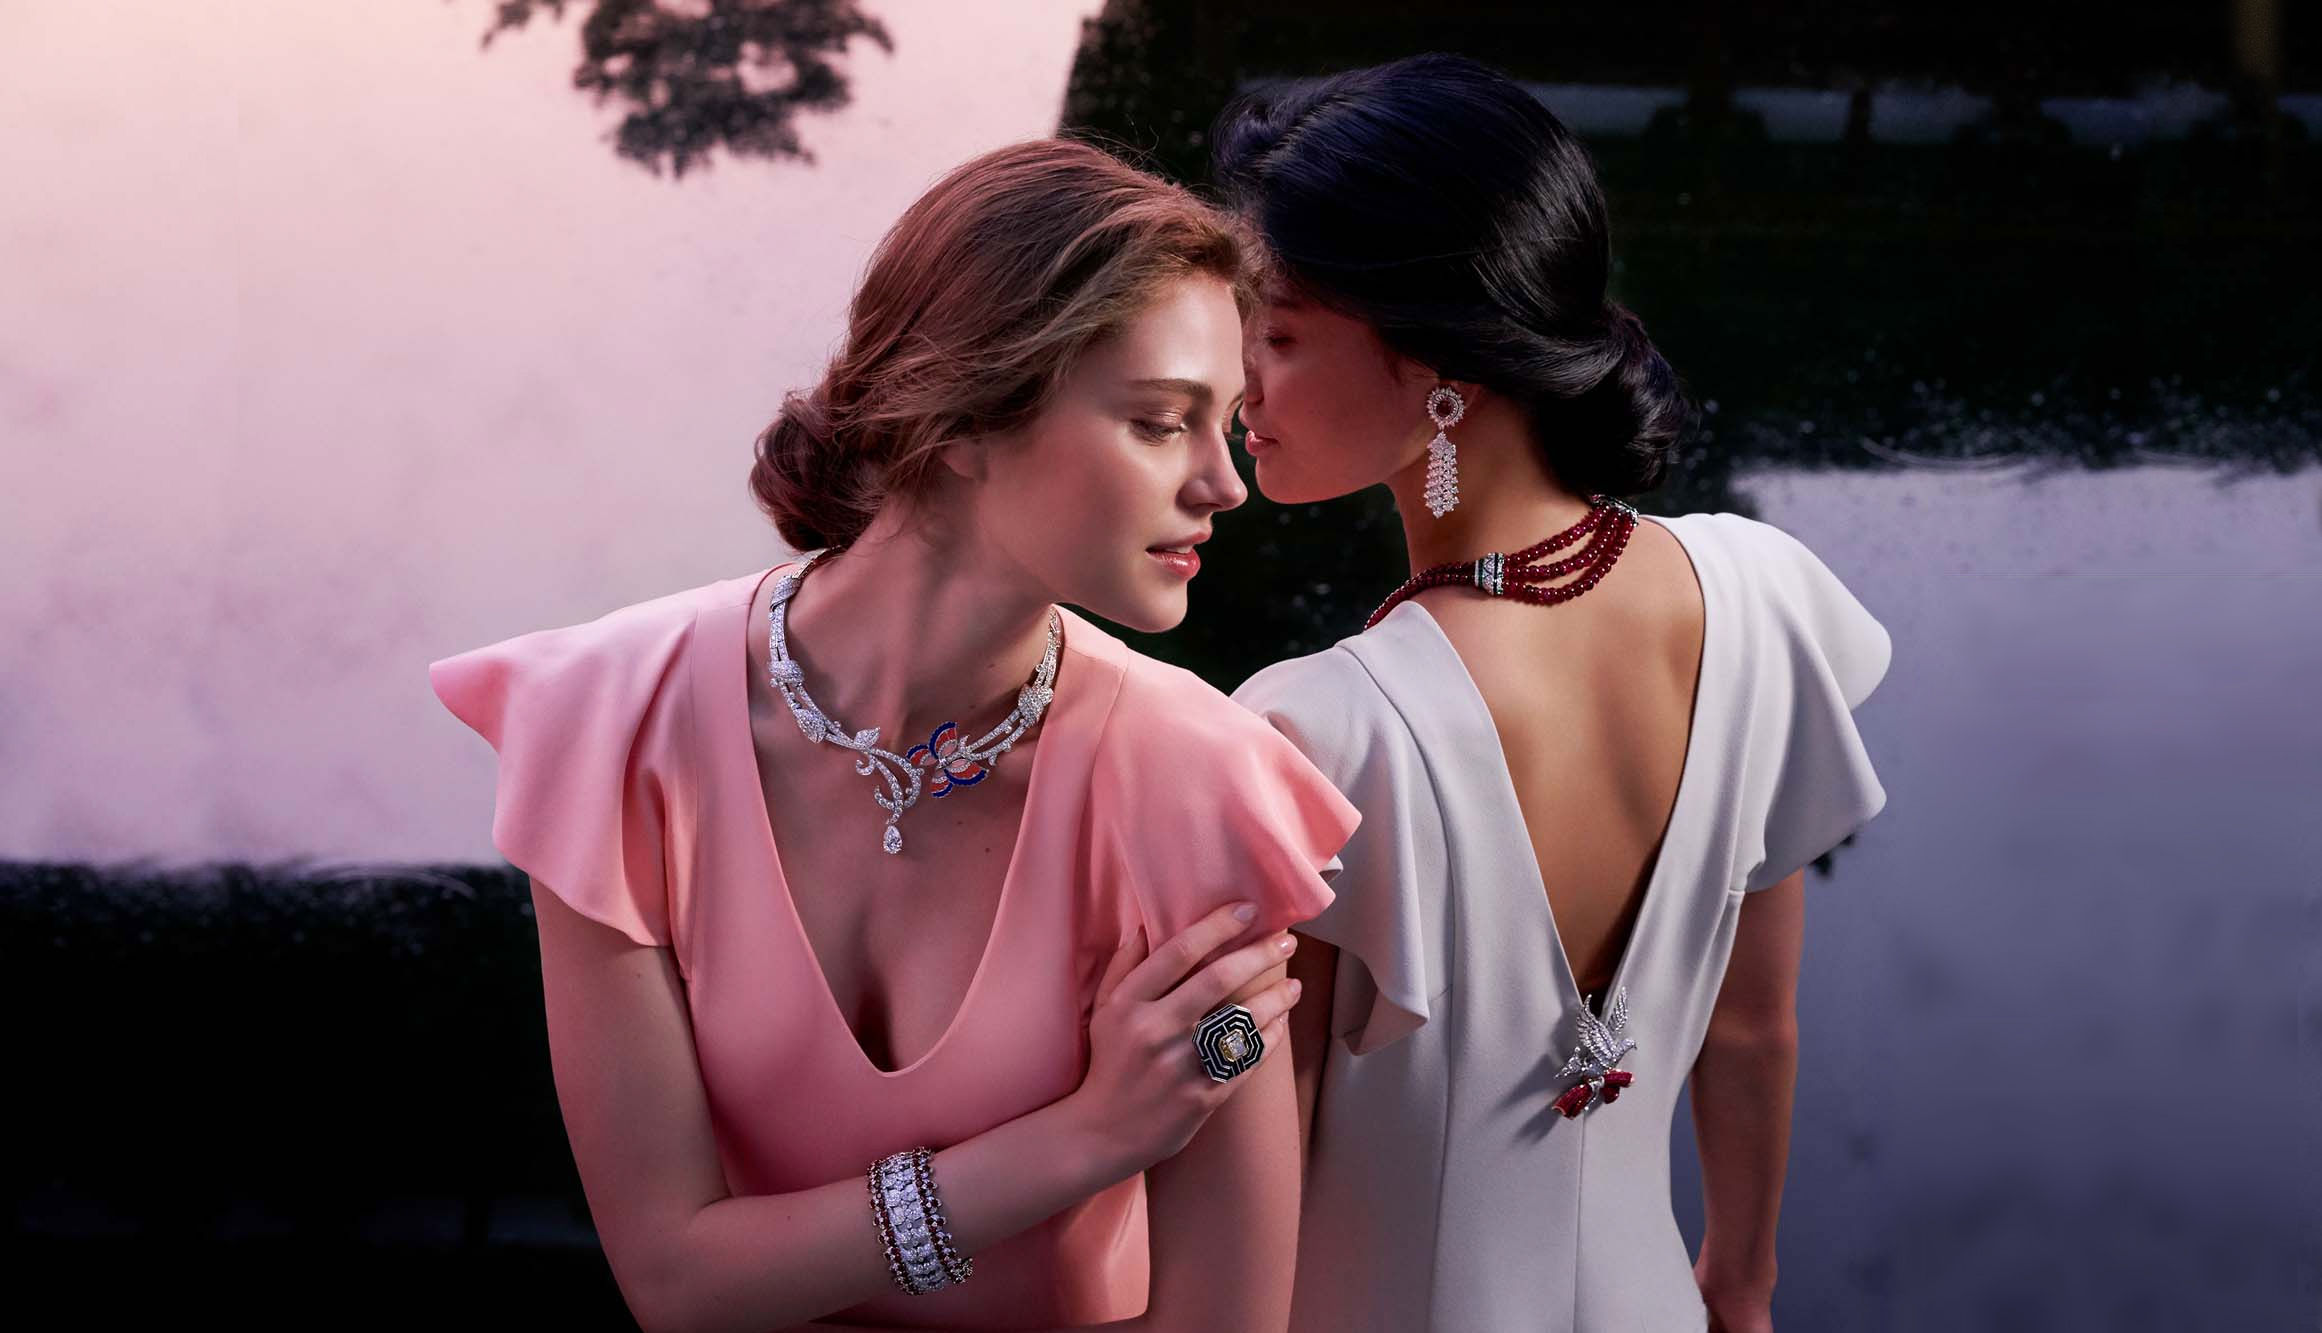 Why Van Cleef & Arpels' Zip Necklace is Known as One of its Most